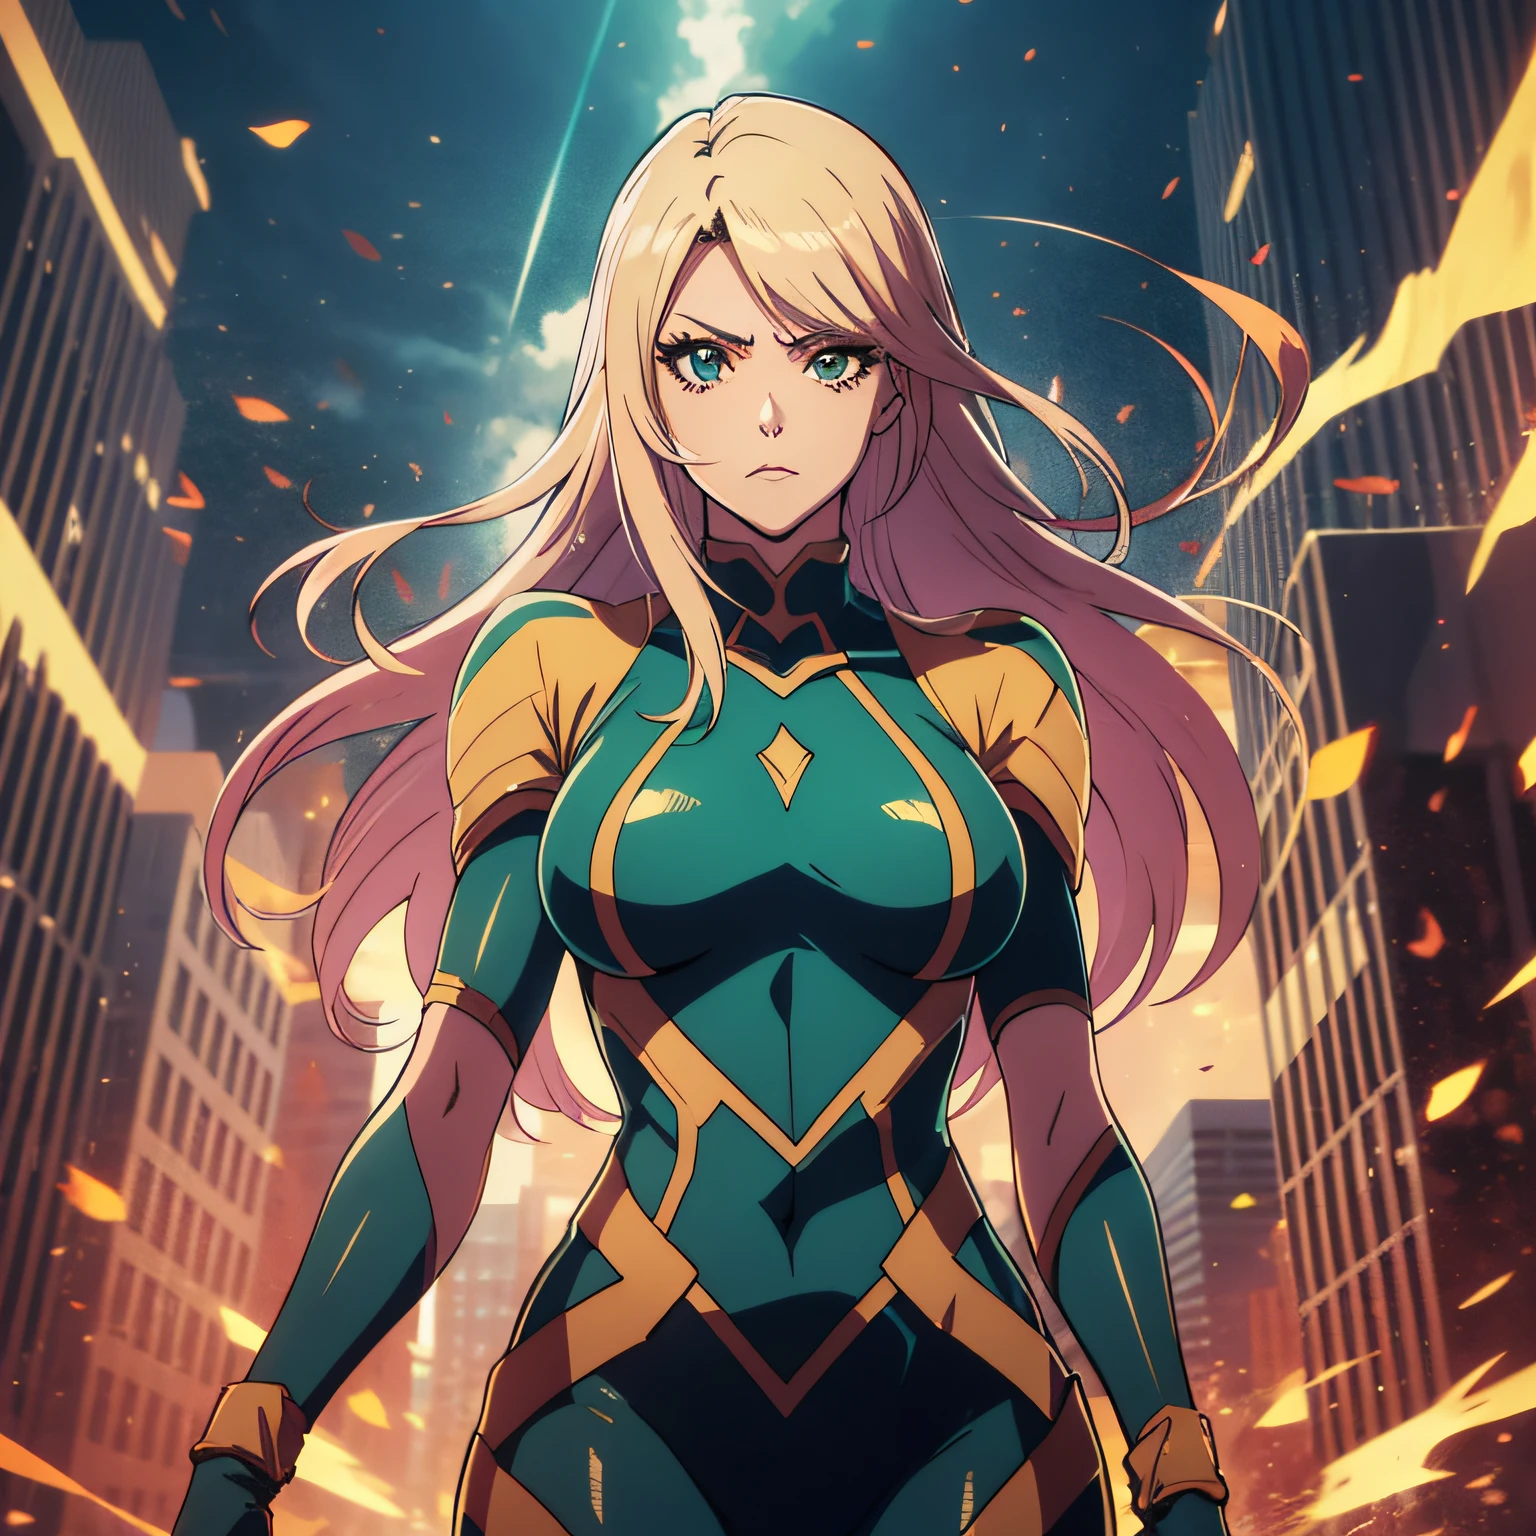 Beautiful woman full body, face perfect, long blondie hair, eyes glowing green, Beautiful woman full body, 30years, muscular and perfect body, orange jumpsuit, breasts big, 1girl, Particle, wind magic, pose, imminet attack, anger, dominant and intimidating, posture of fight, fighting costume, bleach style, animes style, girl from anime manga, Shonen, Nikaido style by dorohedoro, Epic anime style, cinematic lighthing, Epic composition, face detailed, detailedeyes, extremely detaild.